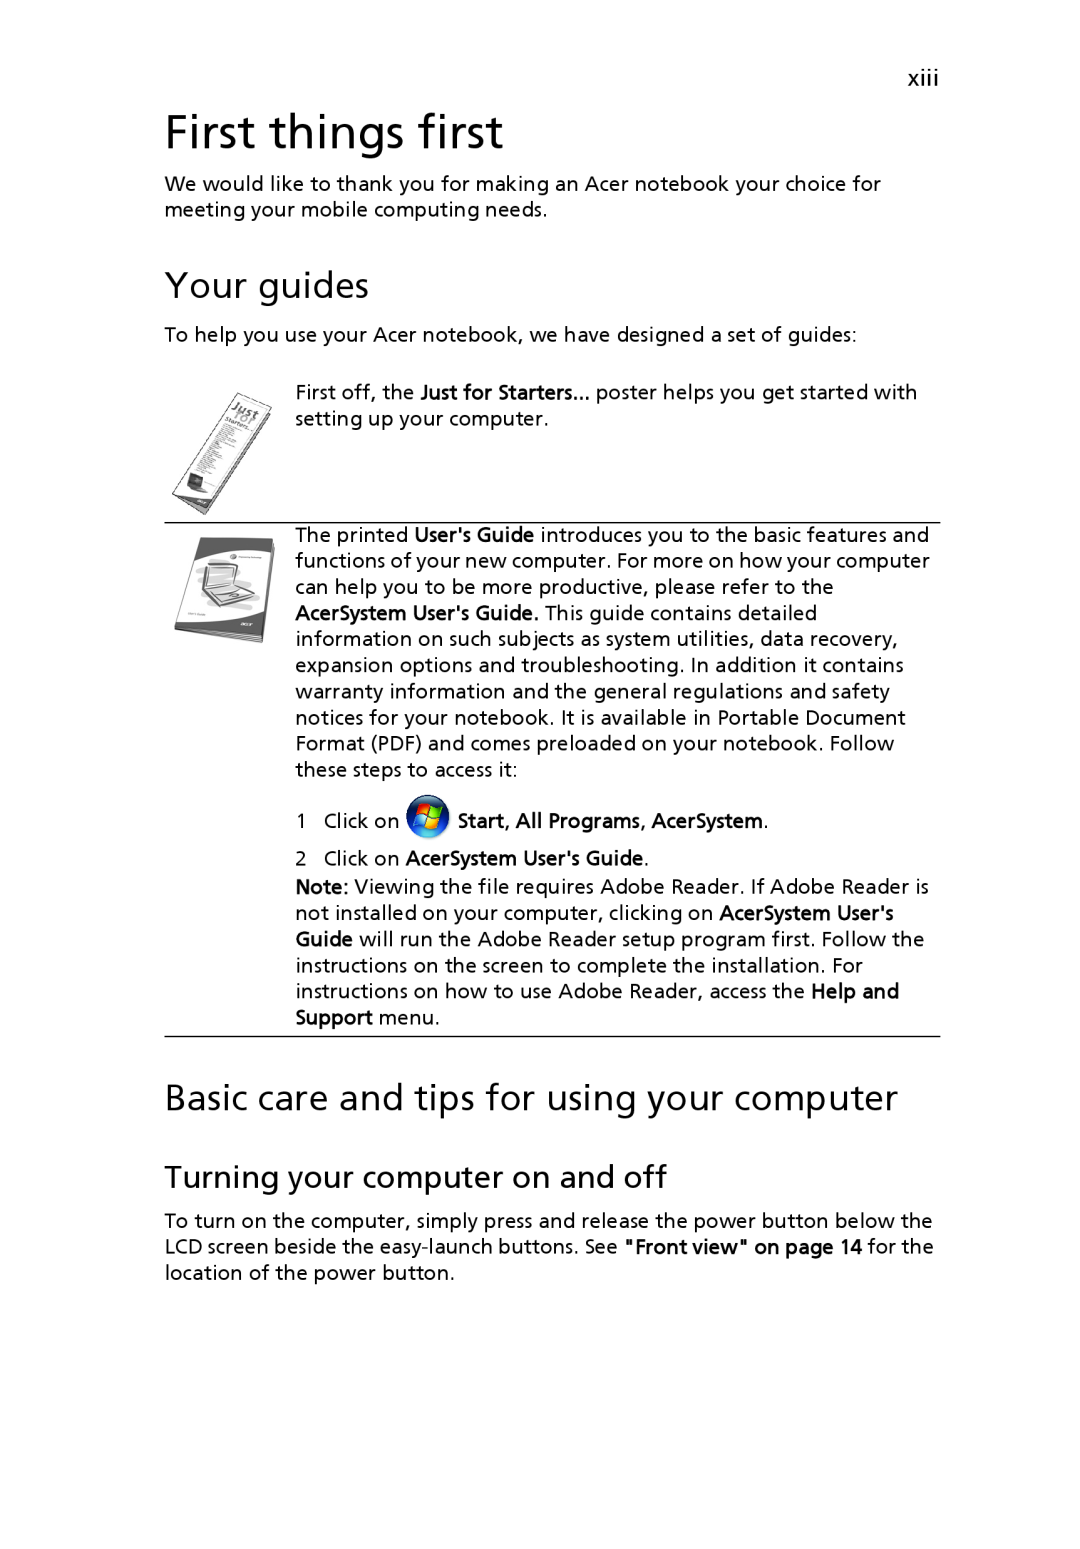 Acer 6492 Series, 6492G manual First things first, Your guides, Basic care and tips for using your computer 